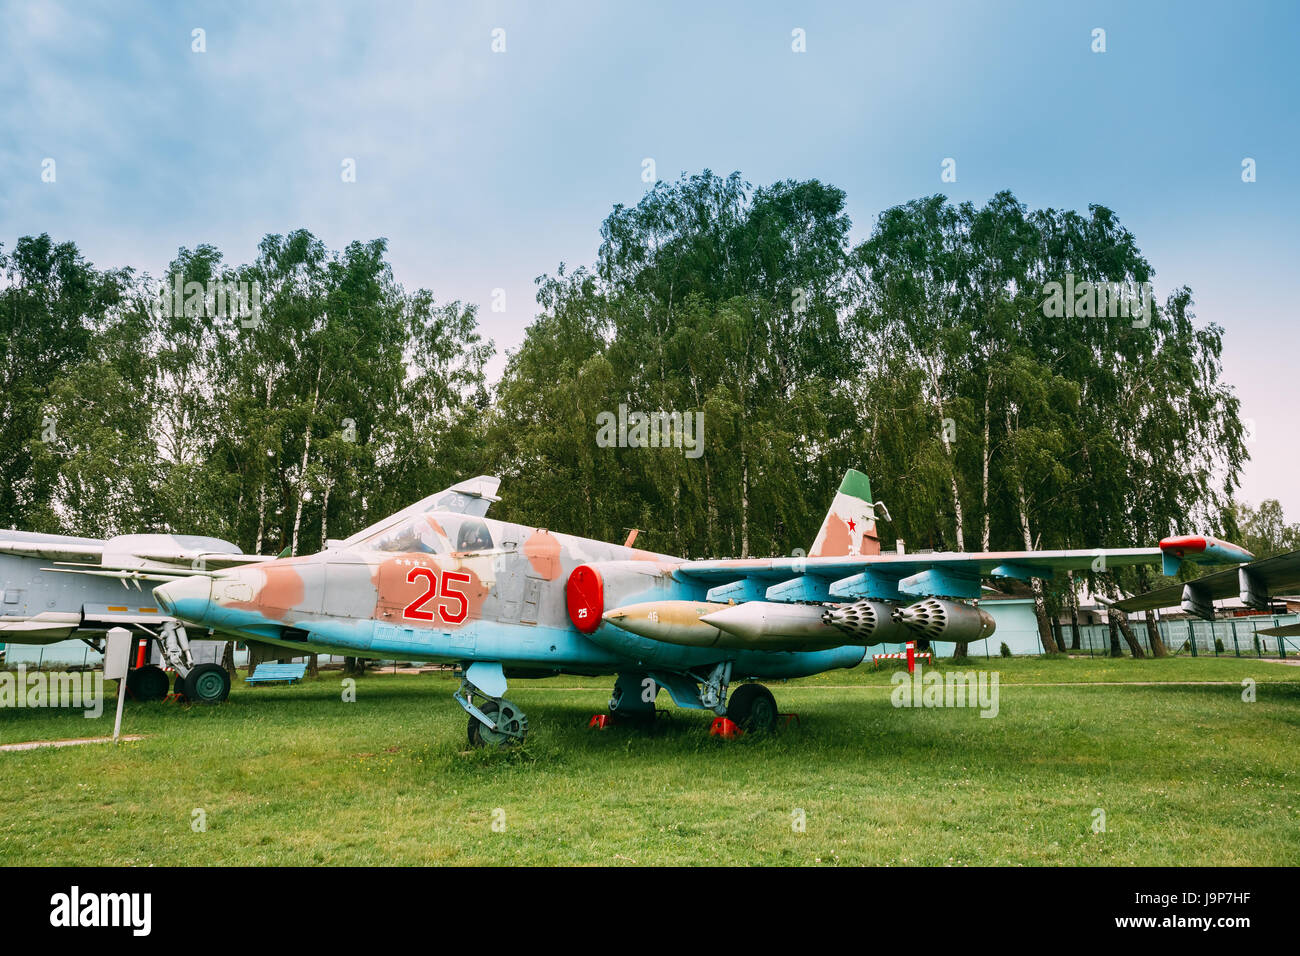 Russian Soviet Armoured Military Subsonic Attack Aircraft Fighter-bomber Stands At Aerodrome. Plane Designed To Provide Close Air Support For Troops I Stock Photo